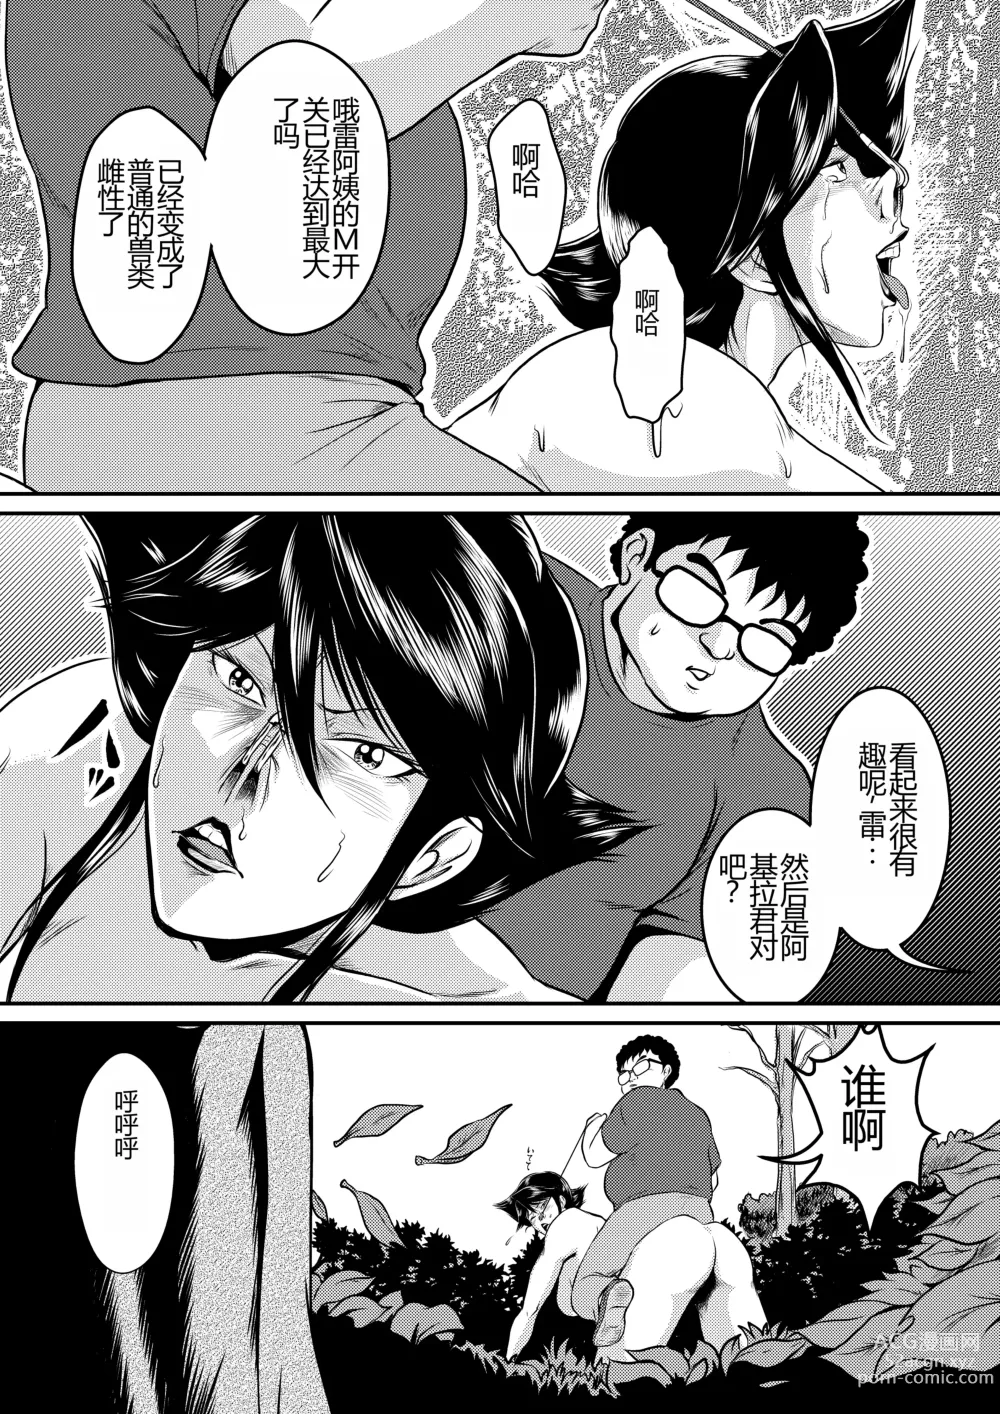 Page 10 of doujinshi Bitch & Slave & Another Slave ~ Bitch-san to Slave-san to Mou Hitori no Slave-san